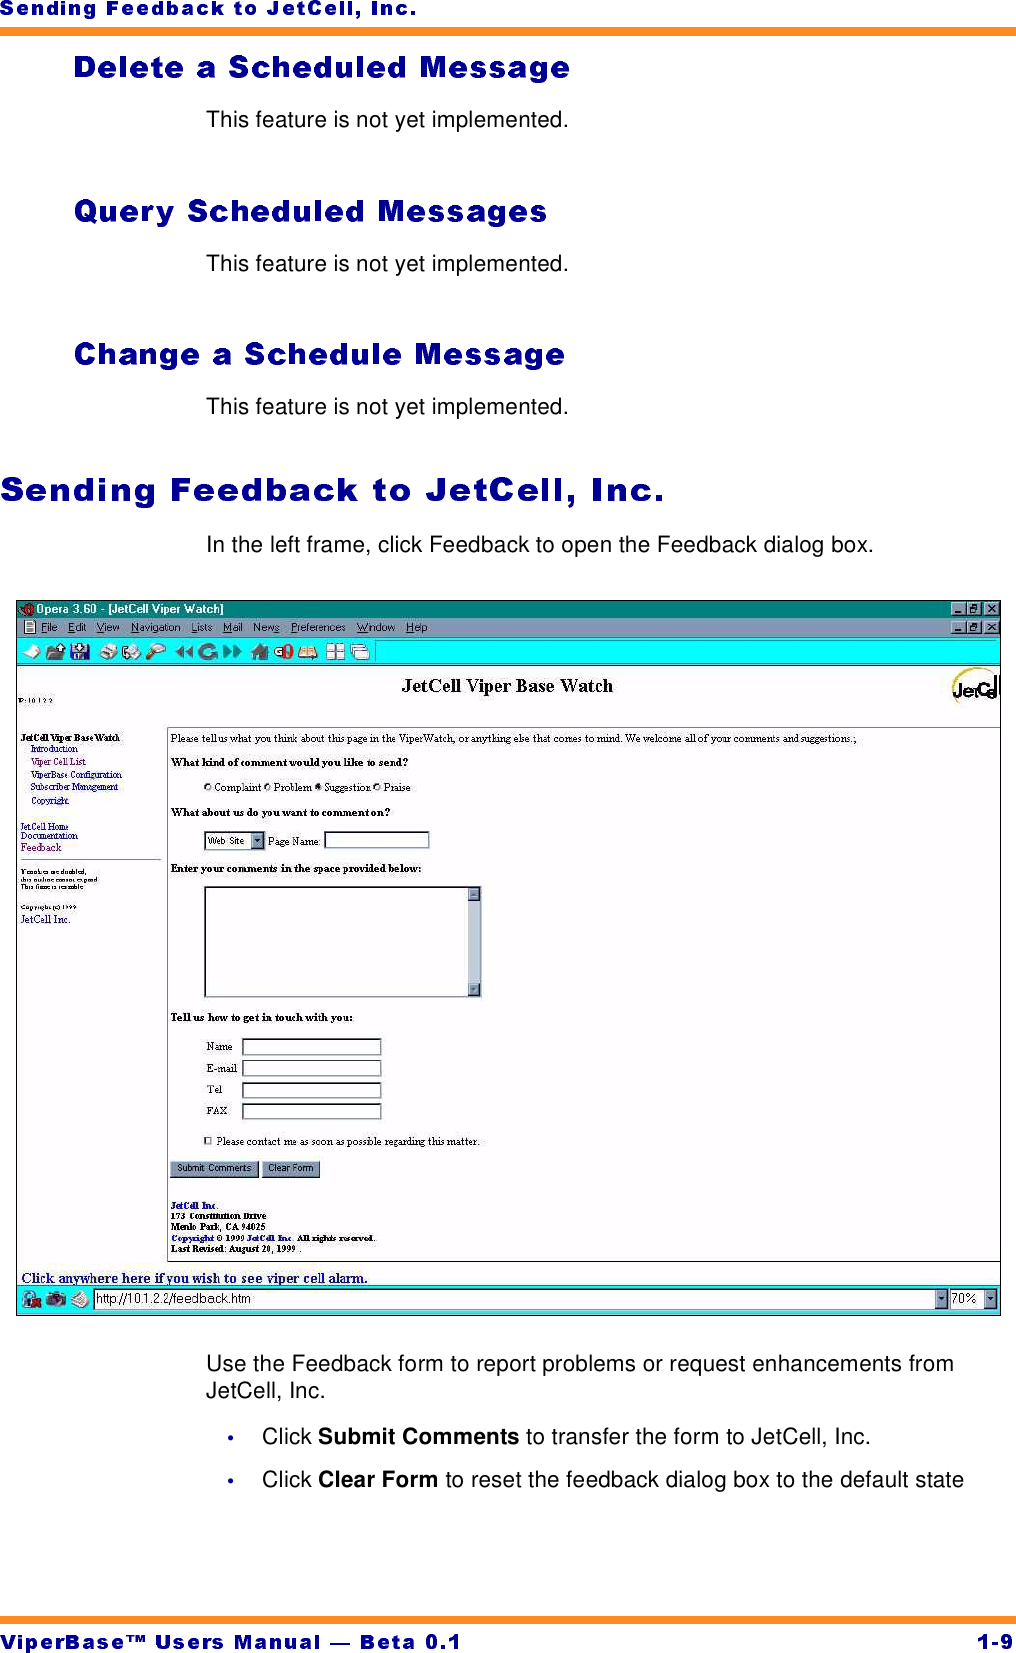 This feature is not yet implemented.This feature is not yet implemented.This feature is not yet implemented.In the left frame, click Feedback to open the Feedback dialog box.Use the Feedback form to report problems or request enhancements from JetCell, Inc.•Click Submit Comments to transfer the form to JetCell, Inc.•Click Clear Form to reset the feedback dialog box to the default state